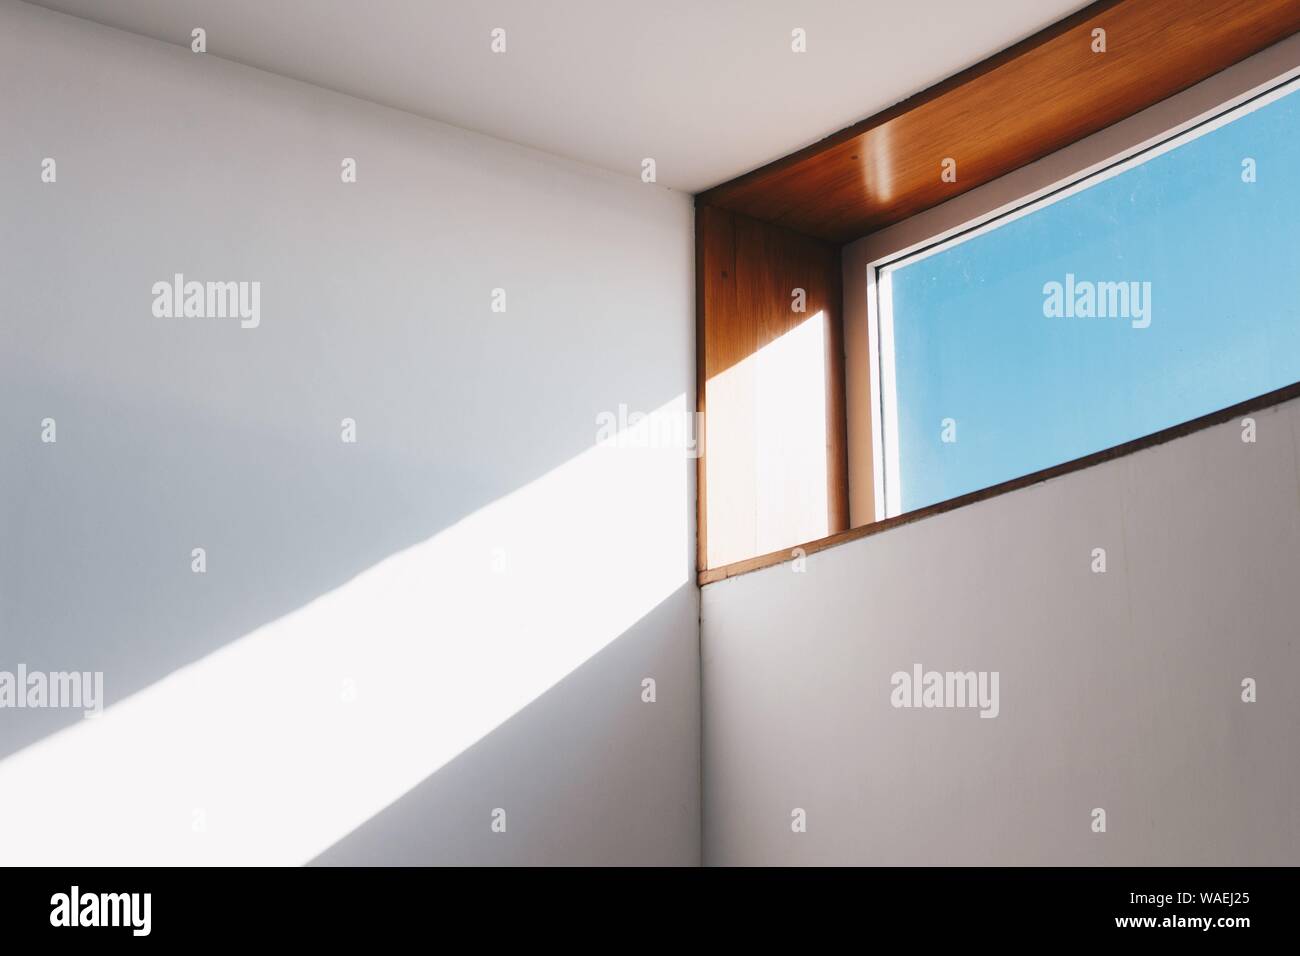 Sunlight shining in through a rectangle window onto white walls Stock Photo